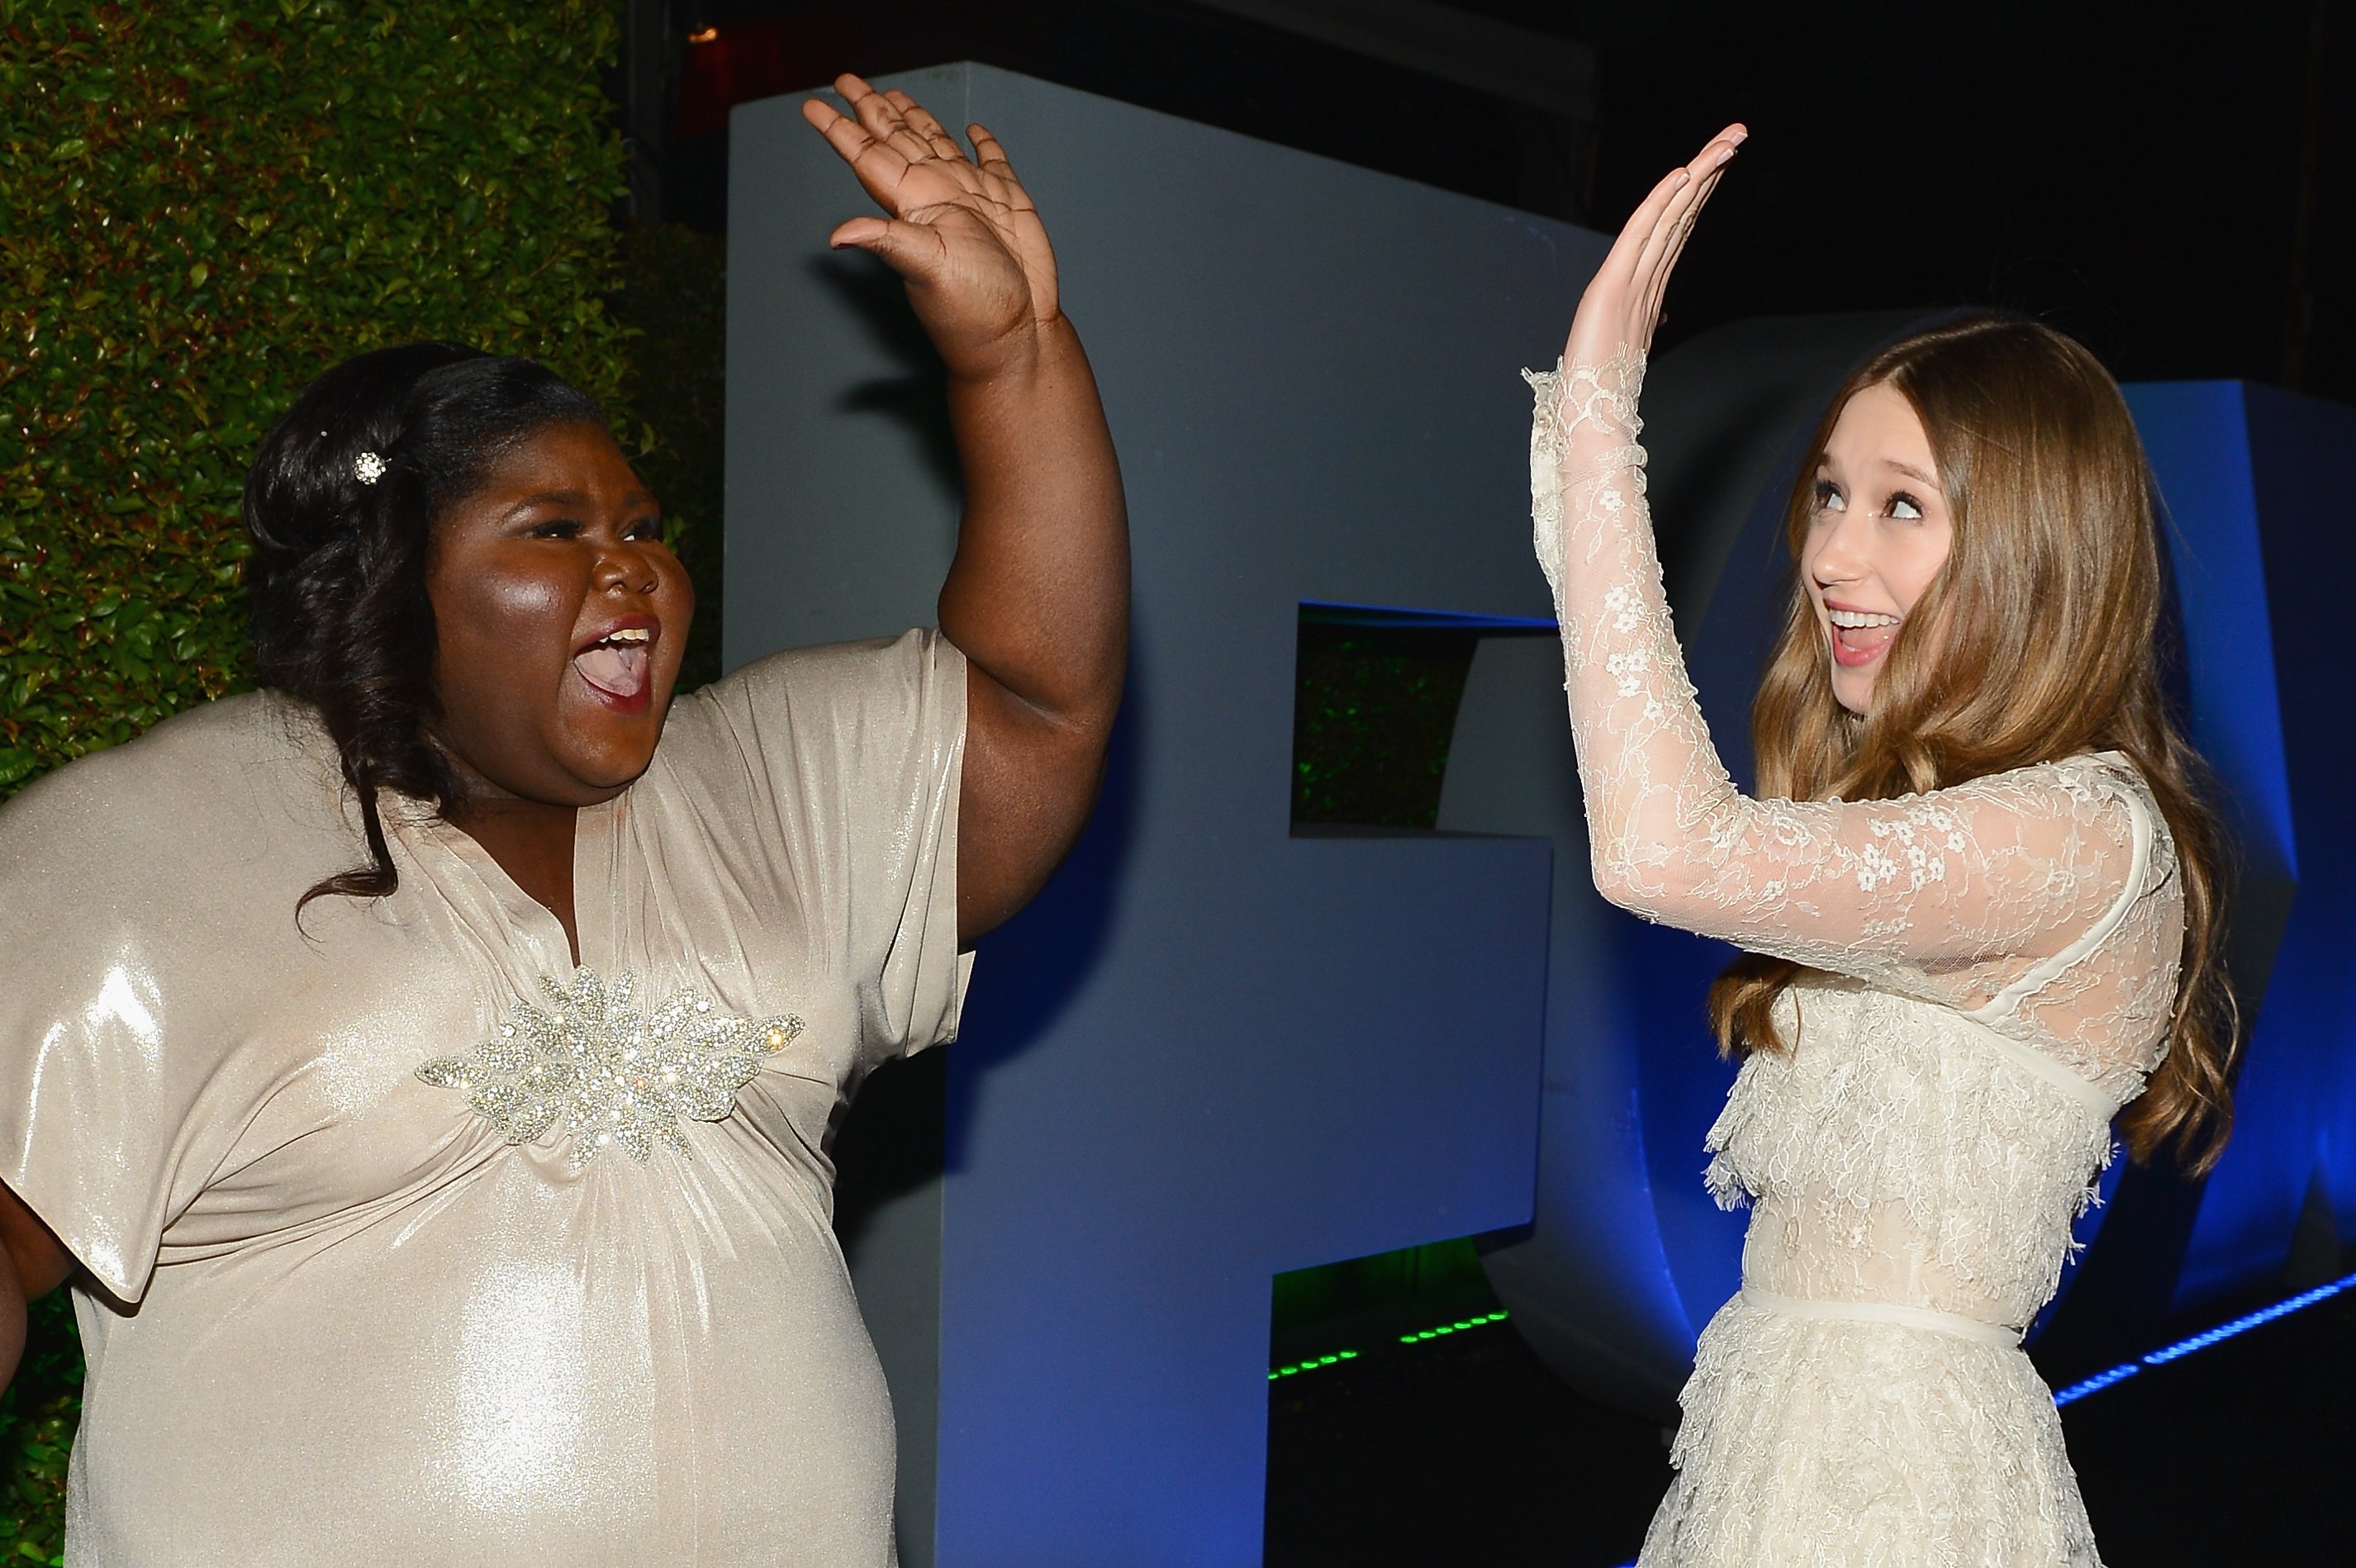 Actresses Gabourey Sidibe and Taissa Farmiga attend the Fox And FX's 2014 Golden Globe Awards Party in Beverly Hills, California on January 12, 2014 | Photo: Getty Images